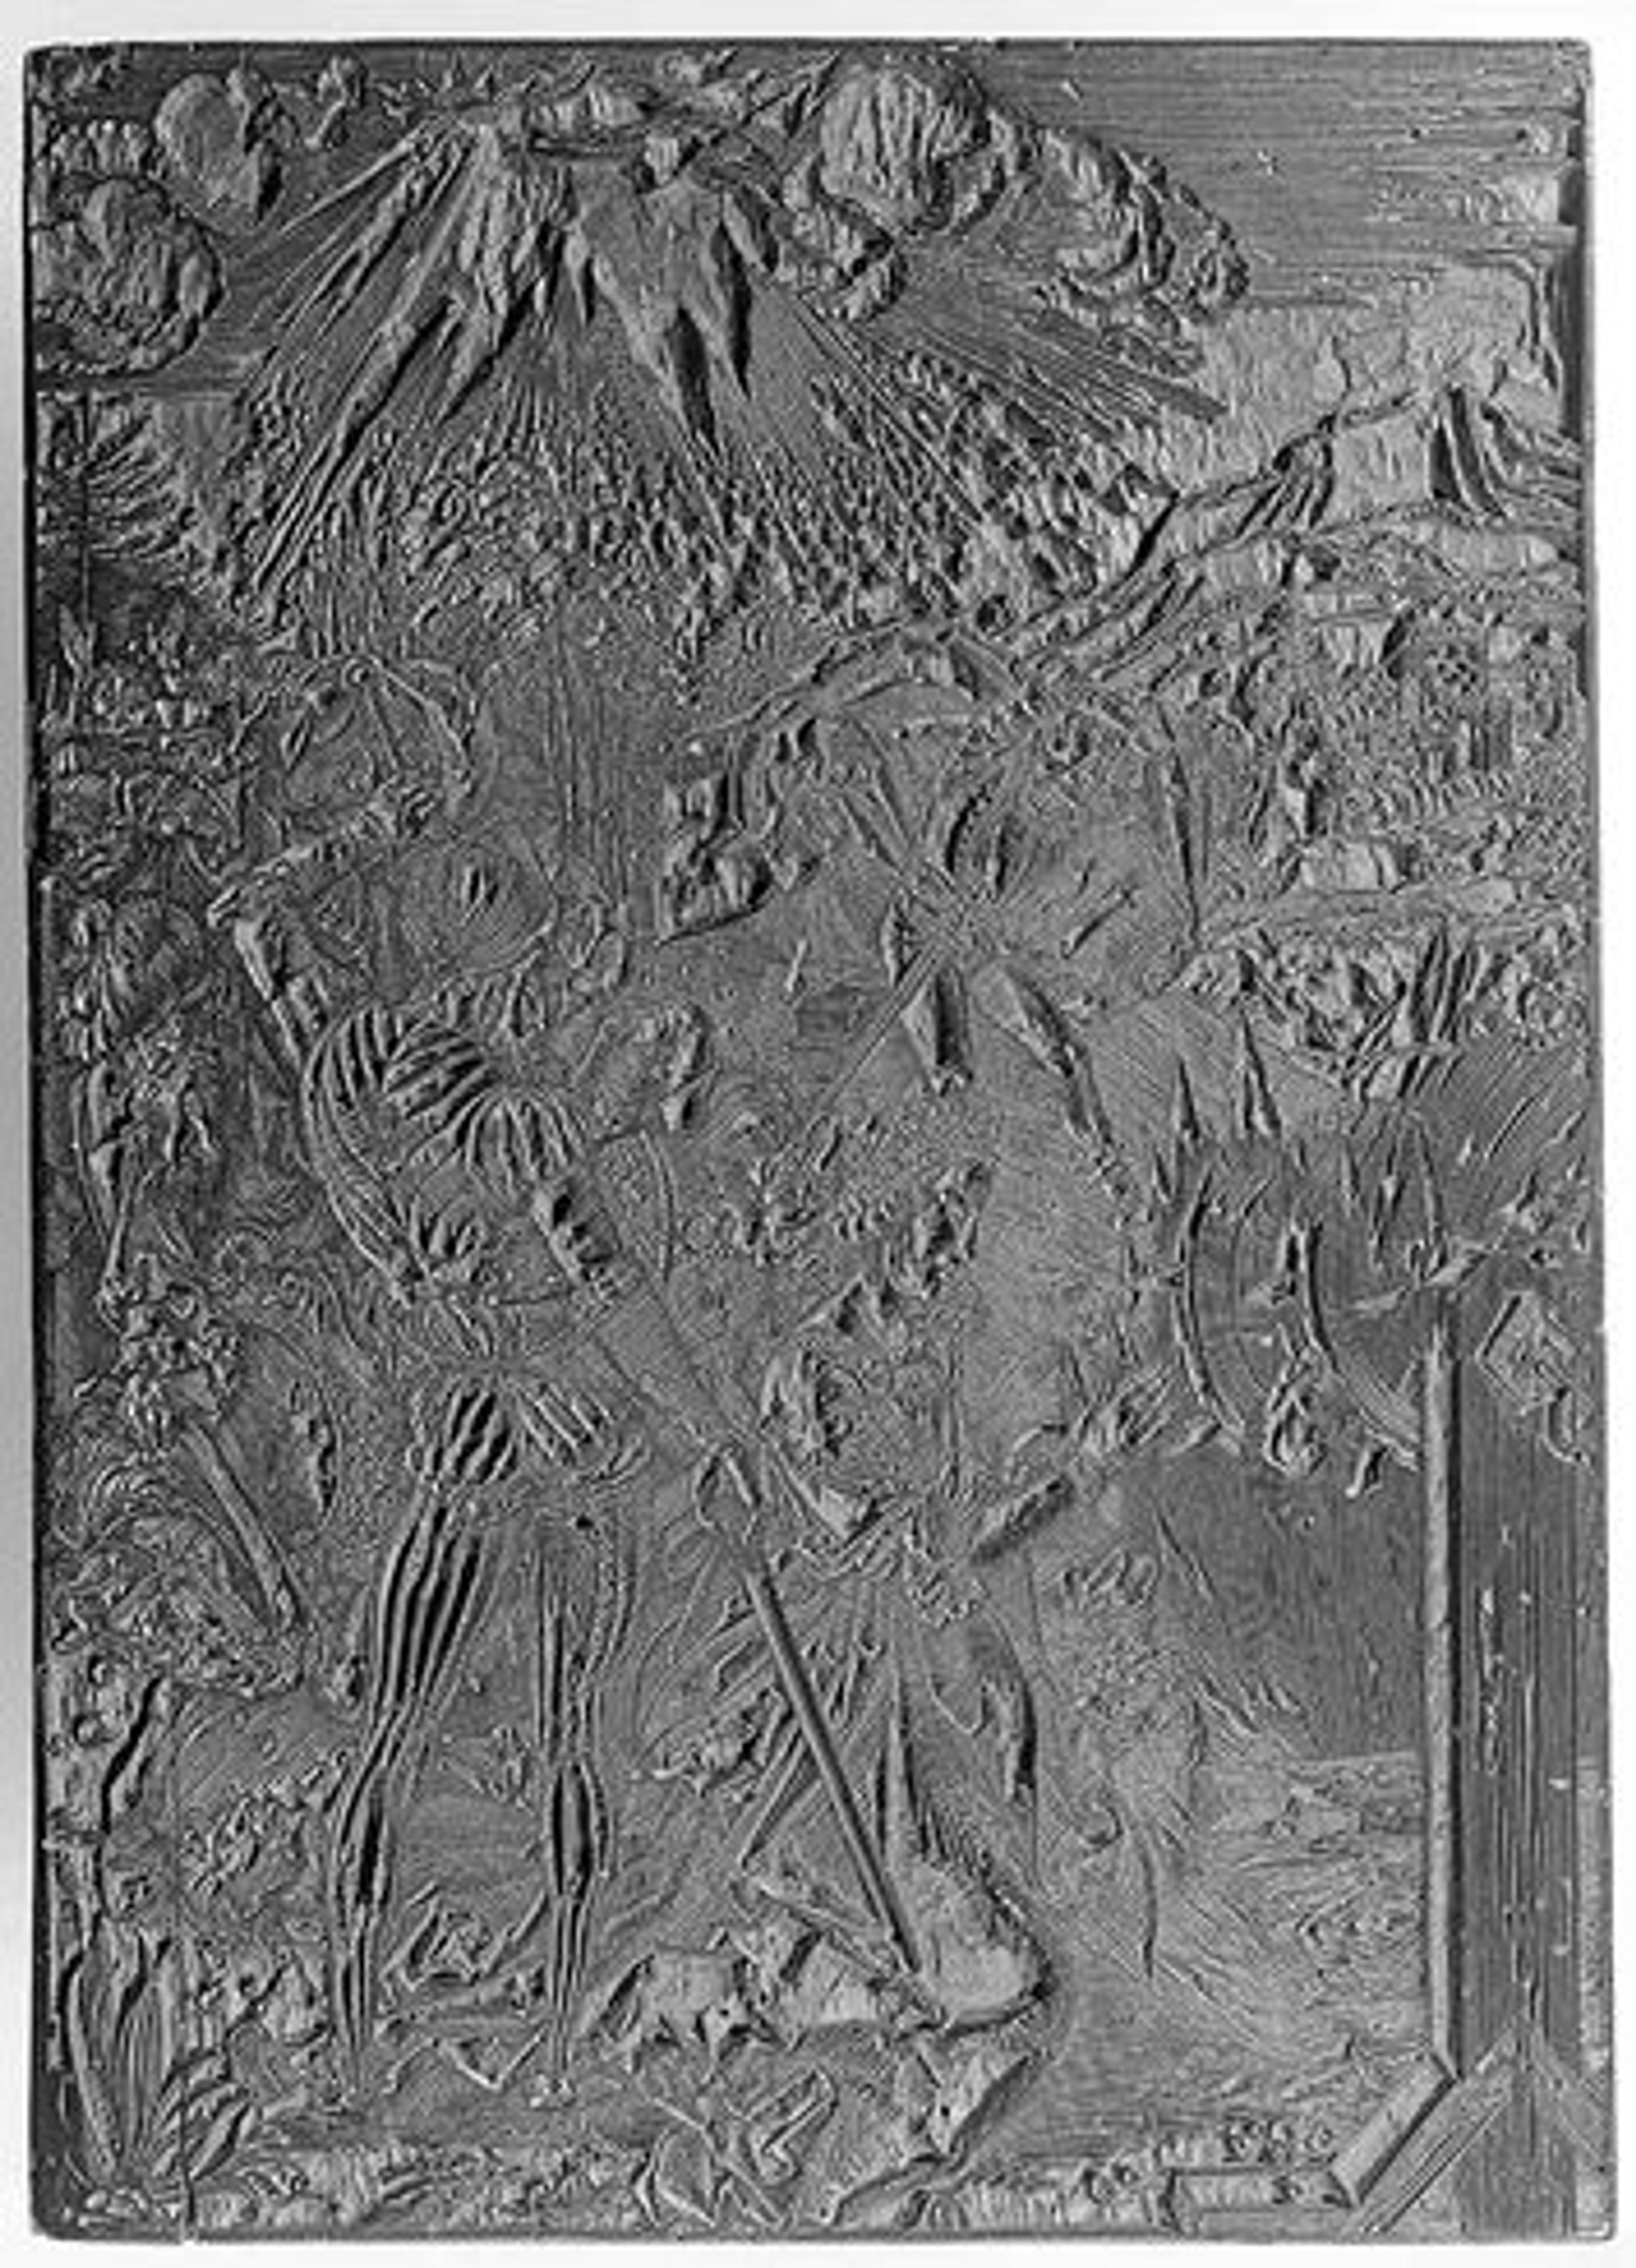 Surface of a dark wood block textured with the engraved lines used to create the woodblock print